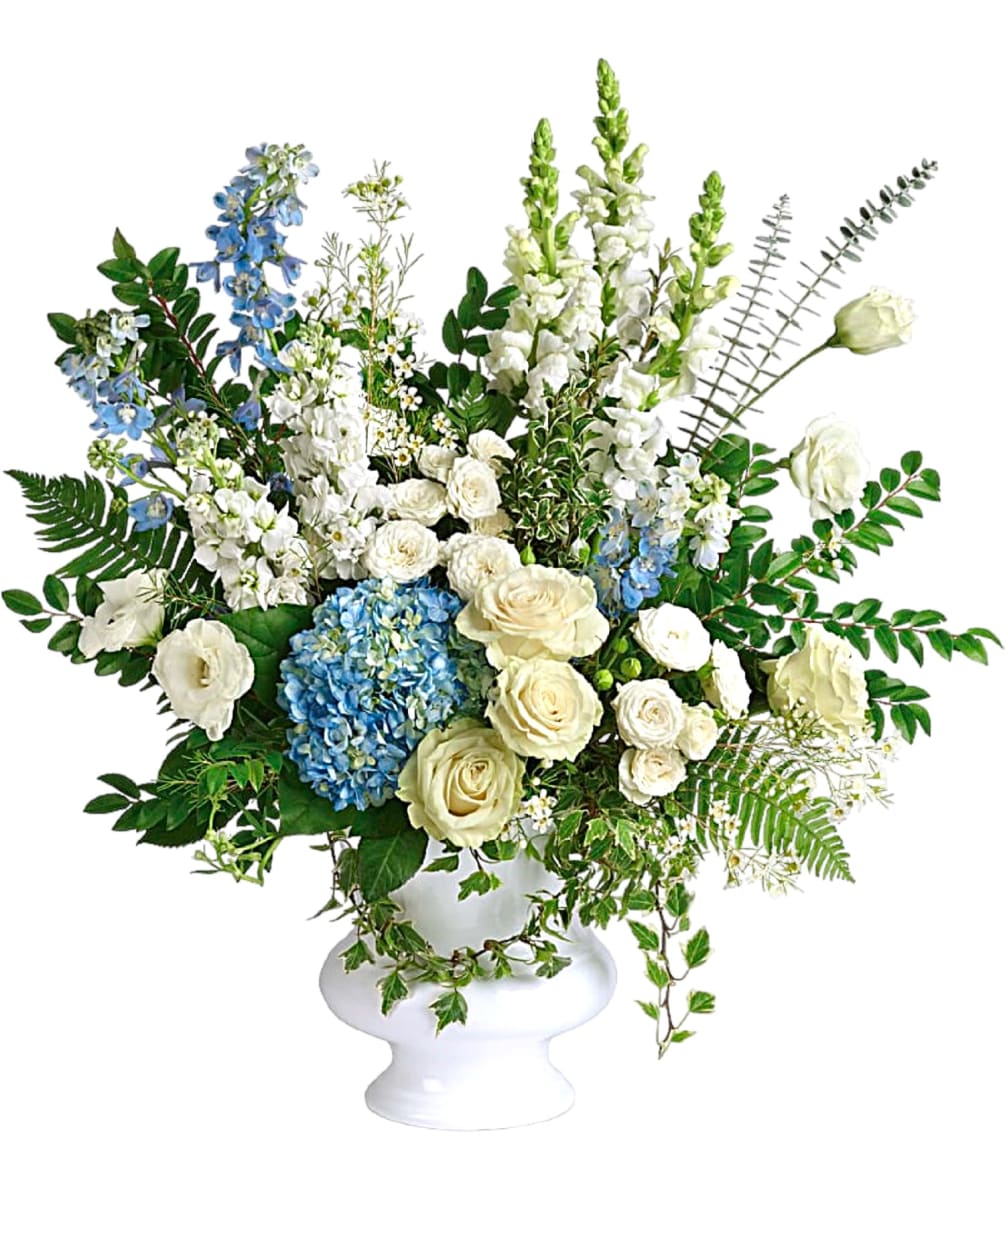 Honor the memory of your beloved with this breathtaking bouquet of sky-blue